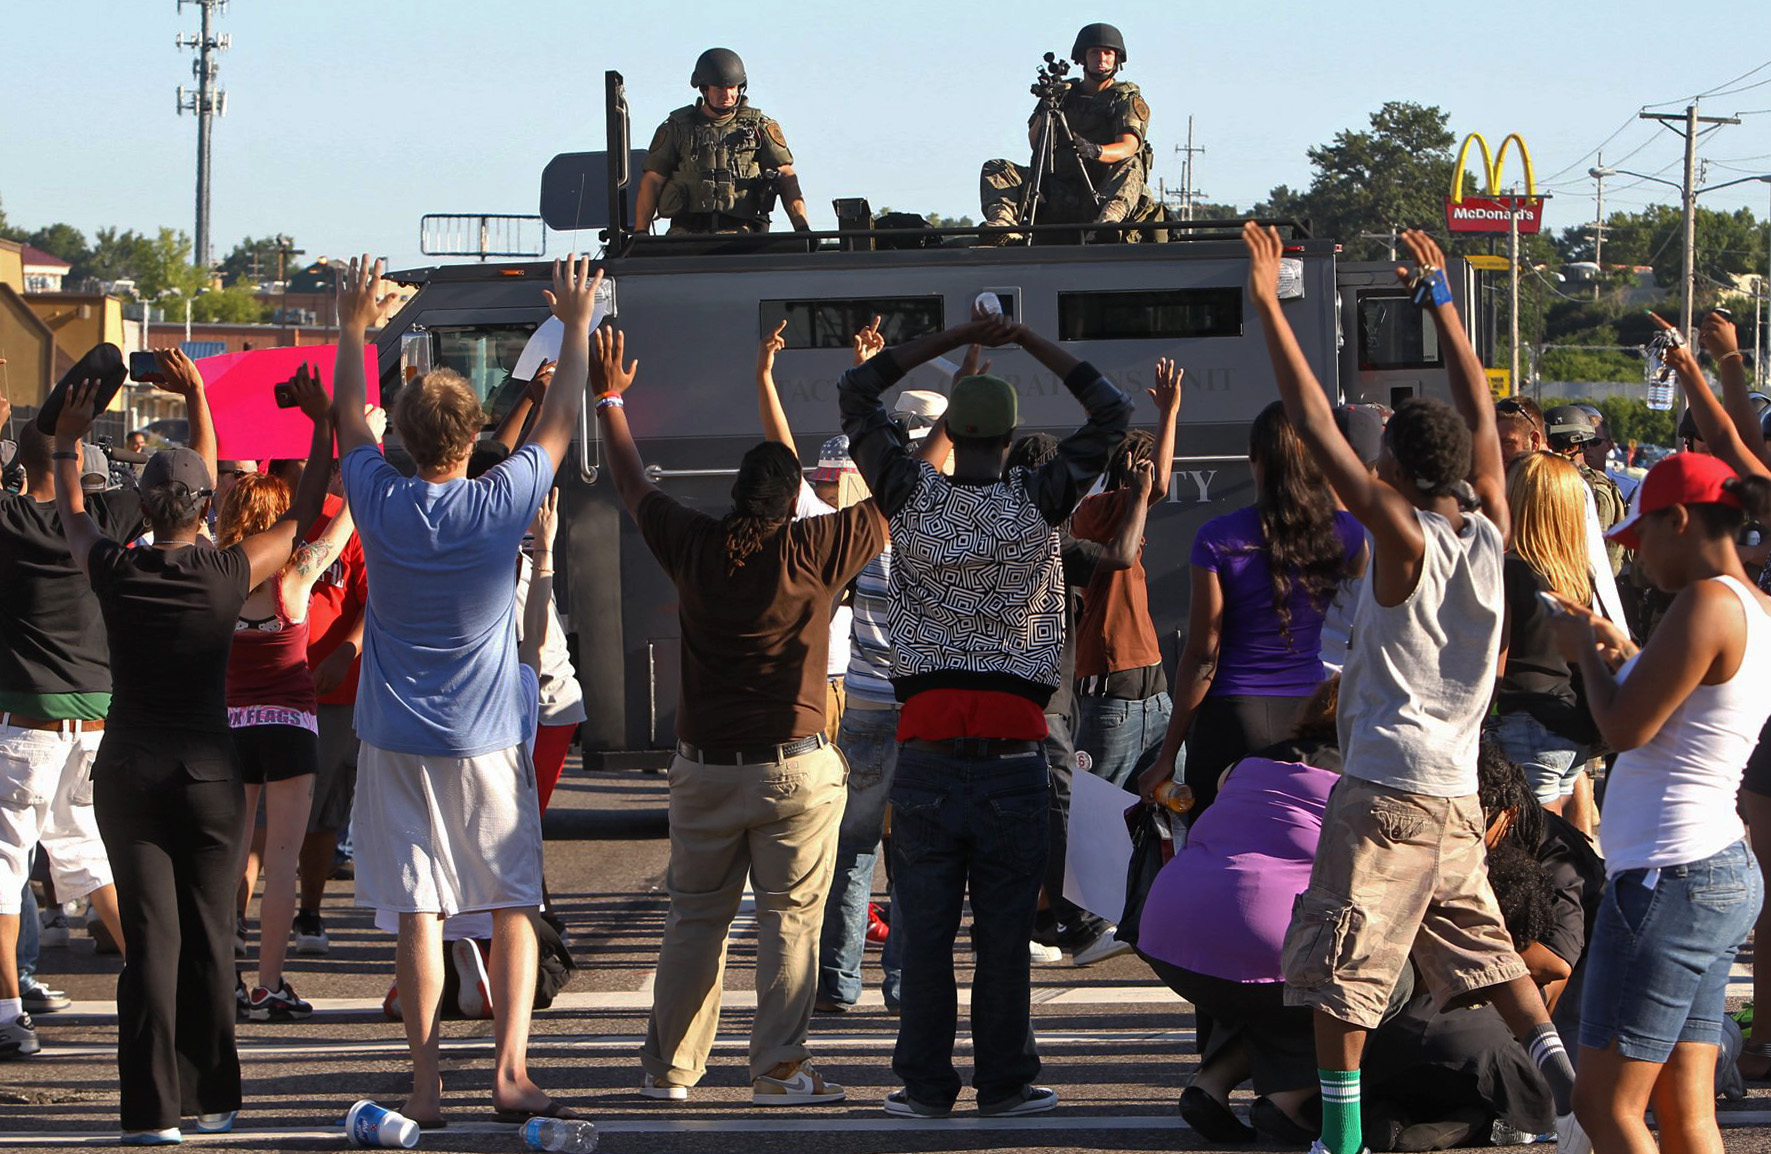 PHOTO: Protesters raise their hands in front of police atop an armored vehicle in Ferguson, Mo. on Aug. 13, 2014. 